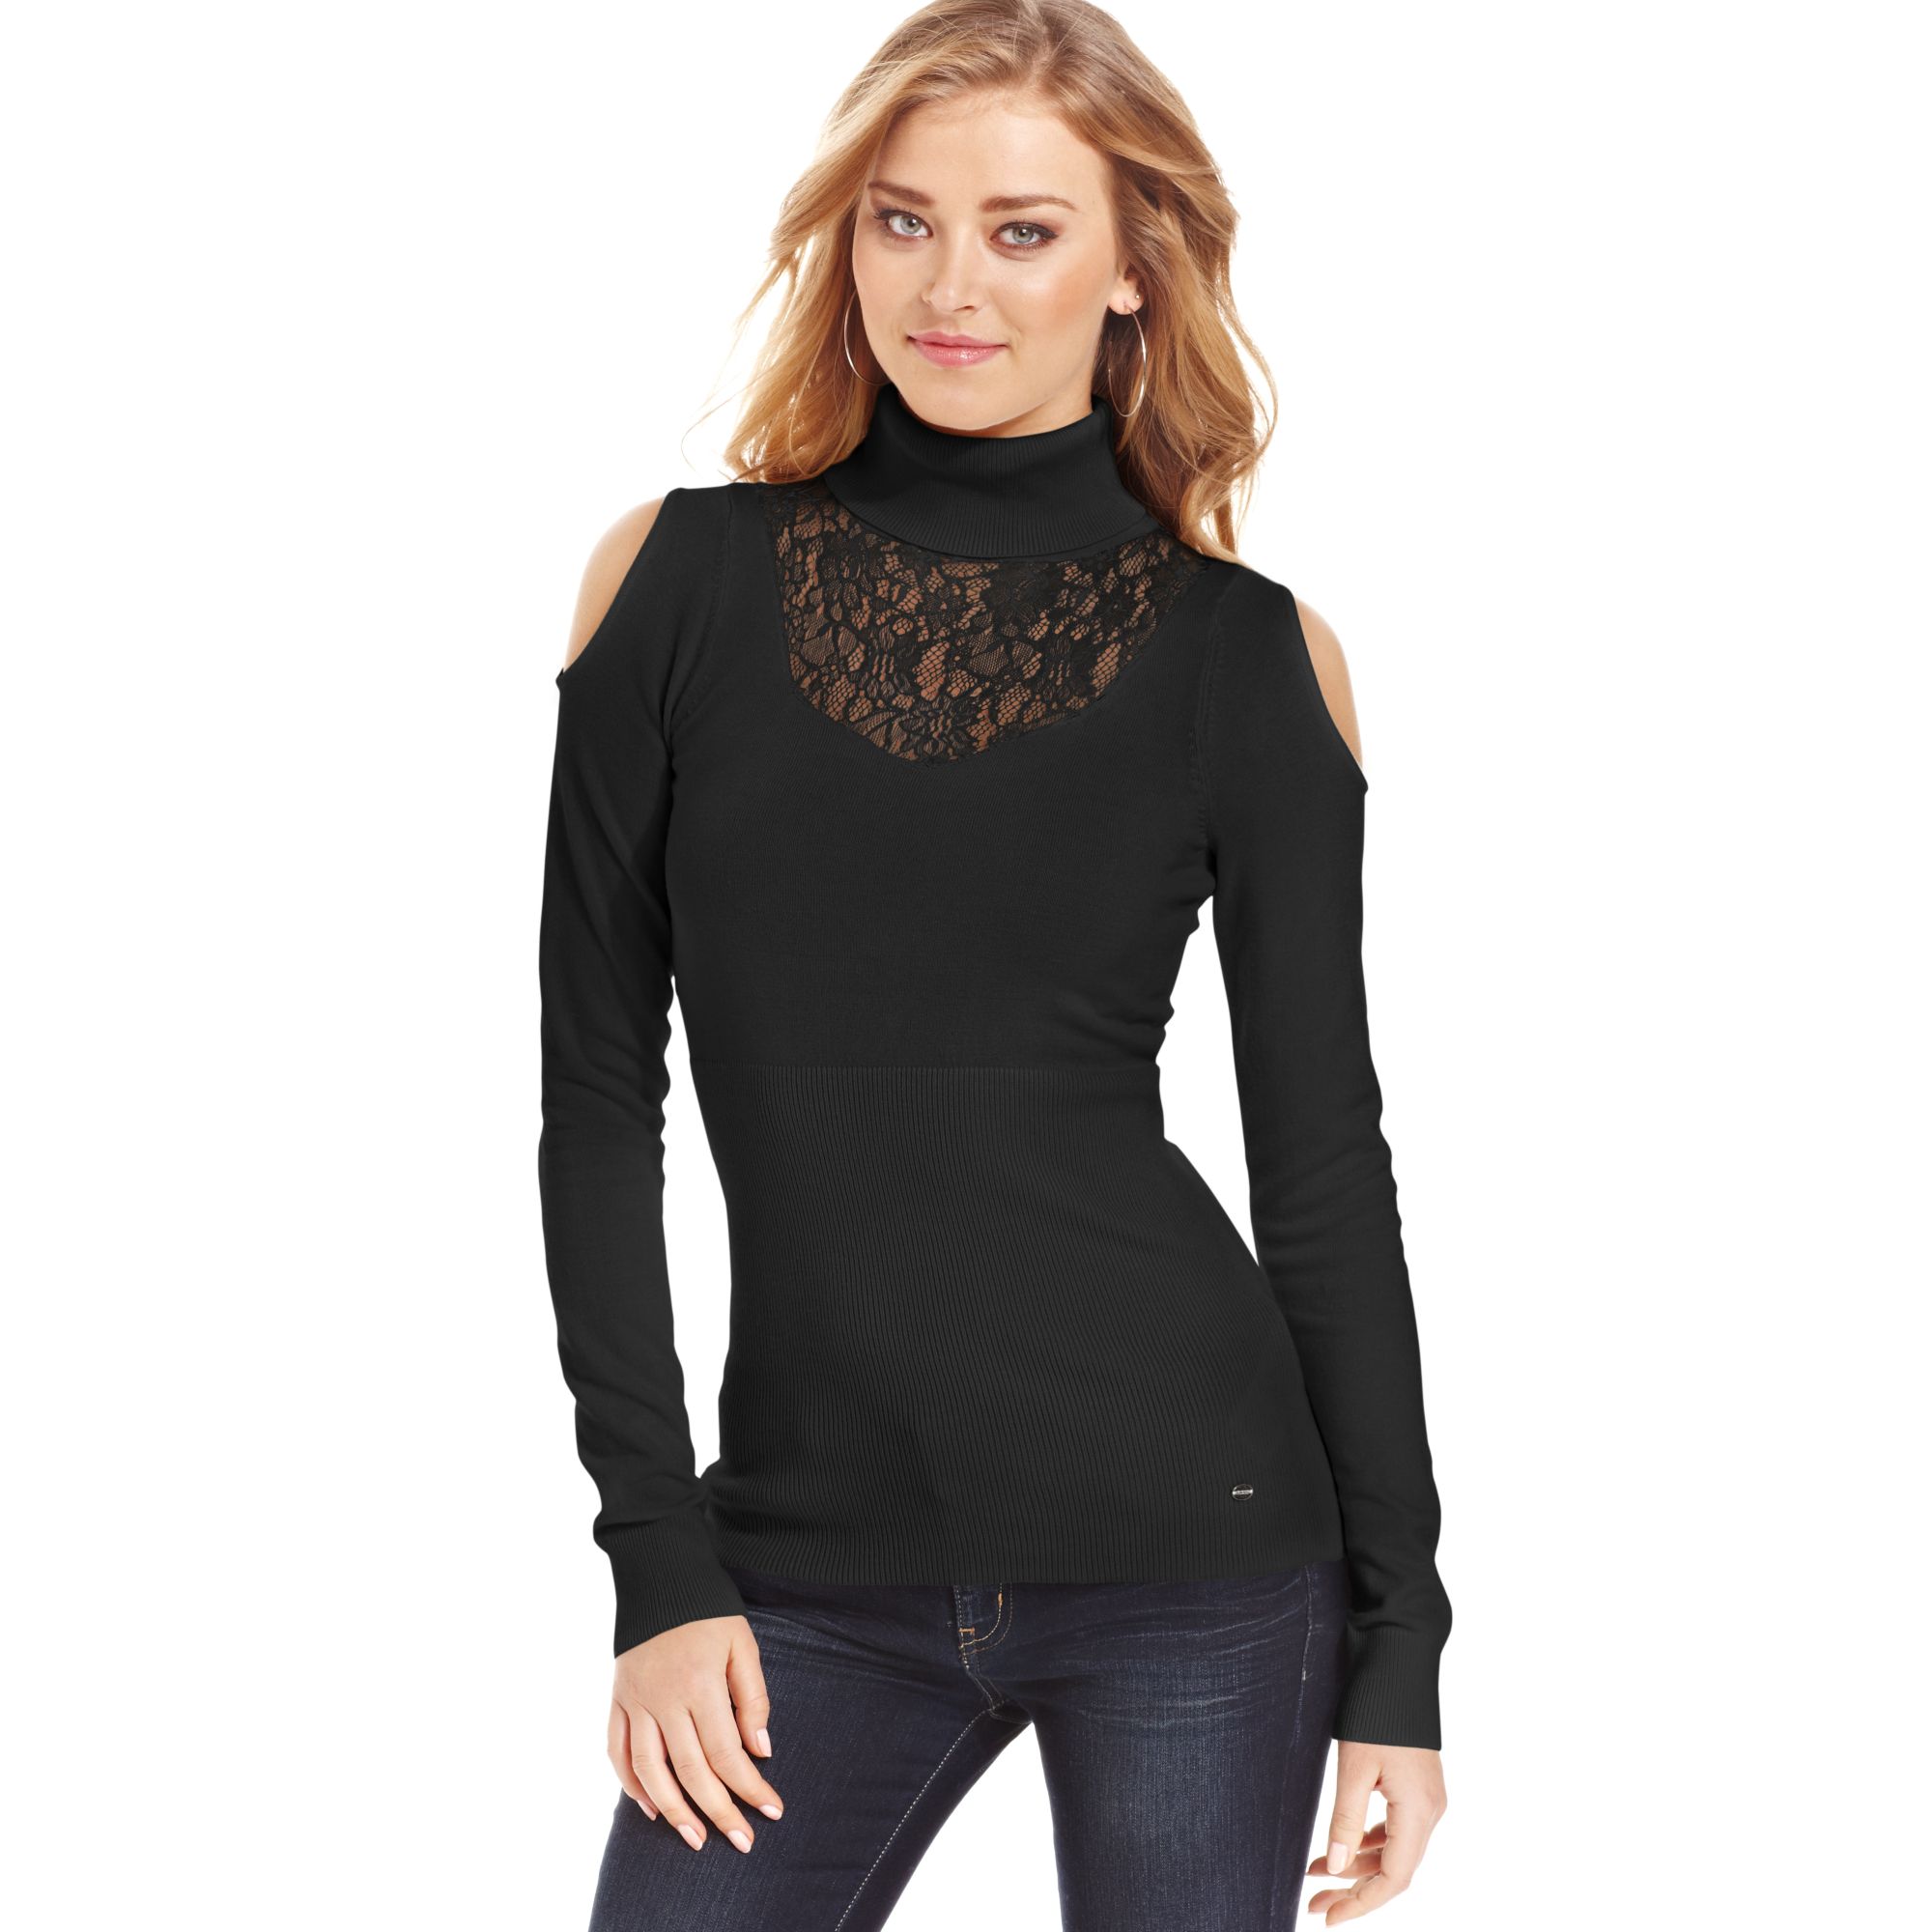 Lyst - Guess Lace Turtleneck in Black